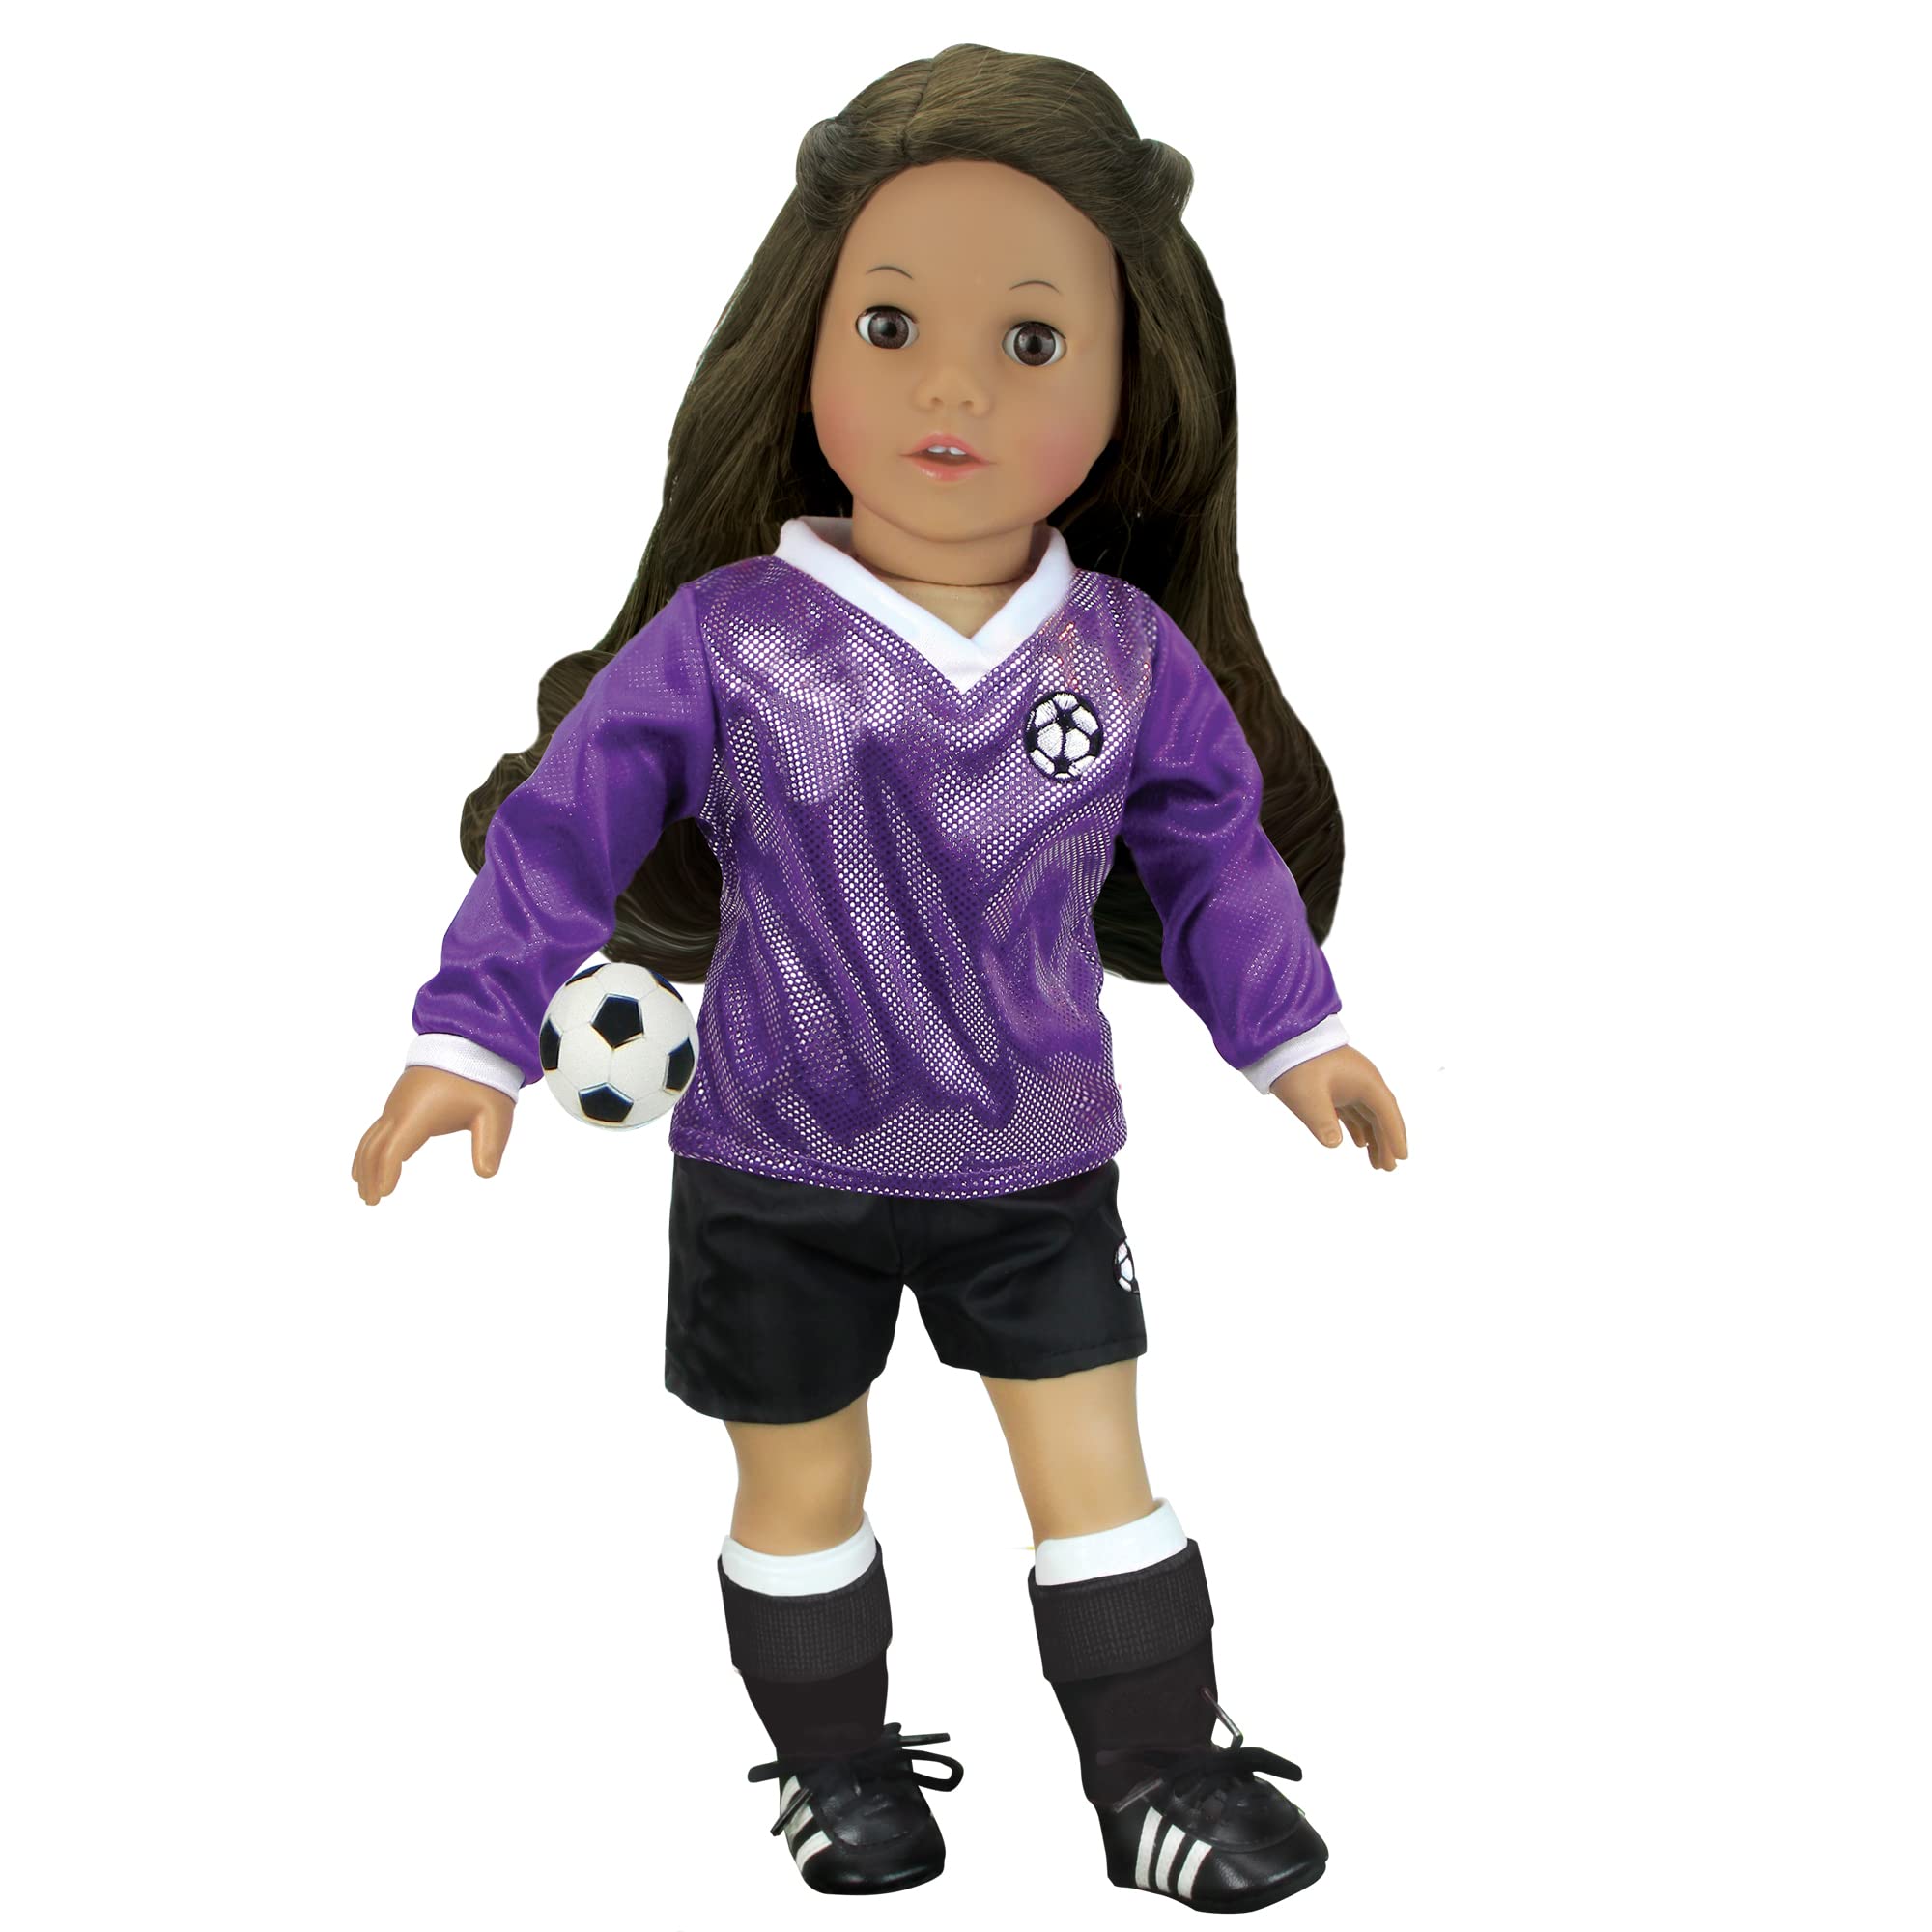 Book Cover Sophia's Doll Soccer Outfit 6-Piece Set with Ball, Purple #1 Jersey, Shorts, Socks, Cleats, and Shin Guards for 18